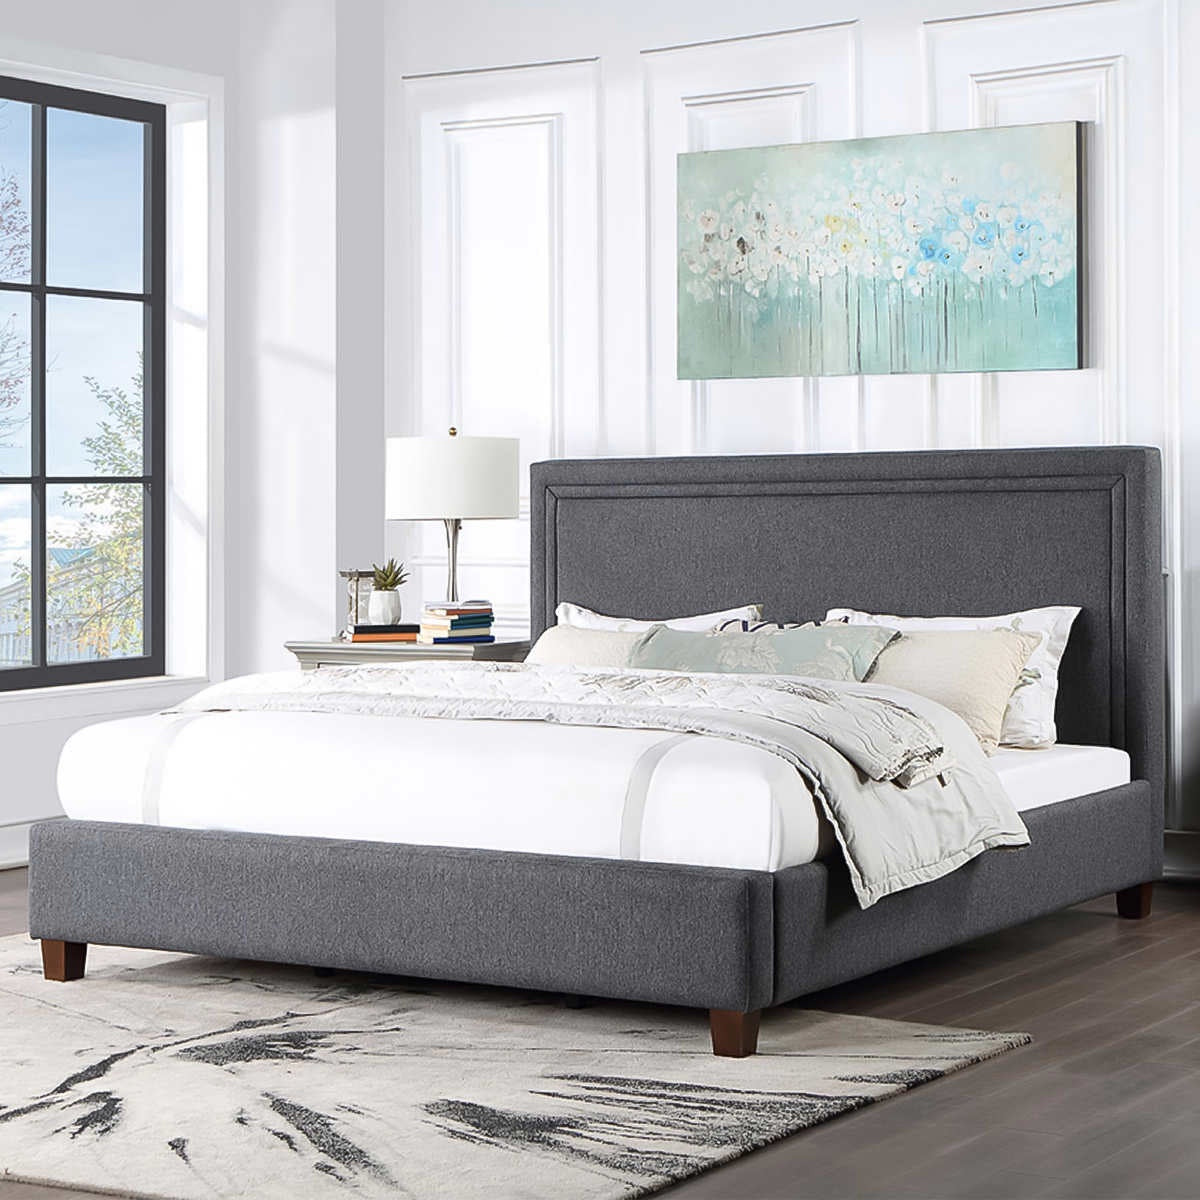 Ravens Point Contemporary Grey Upholstered King Bed